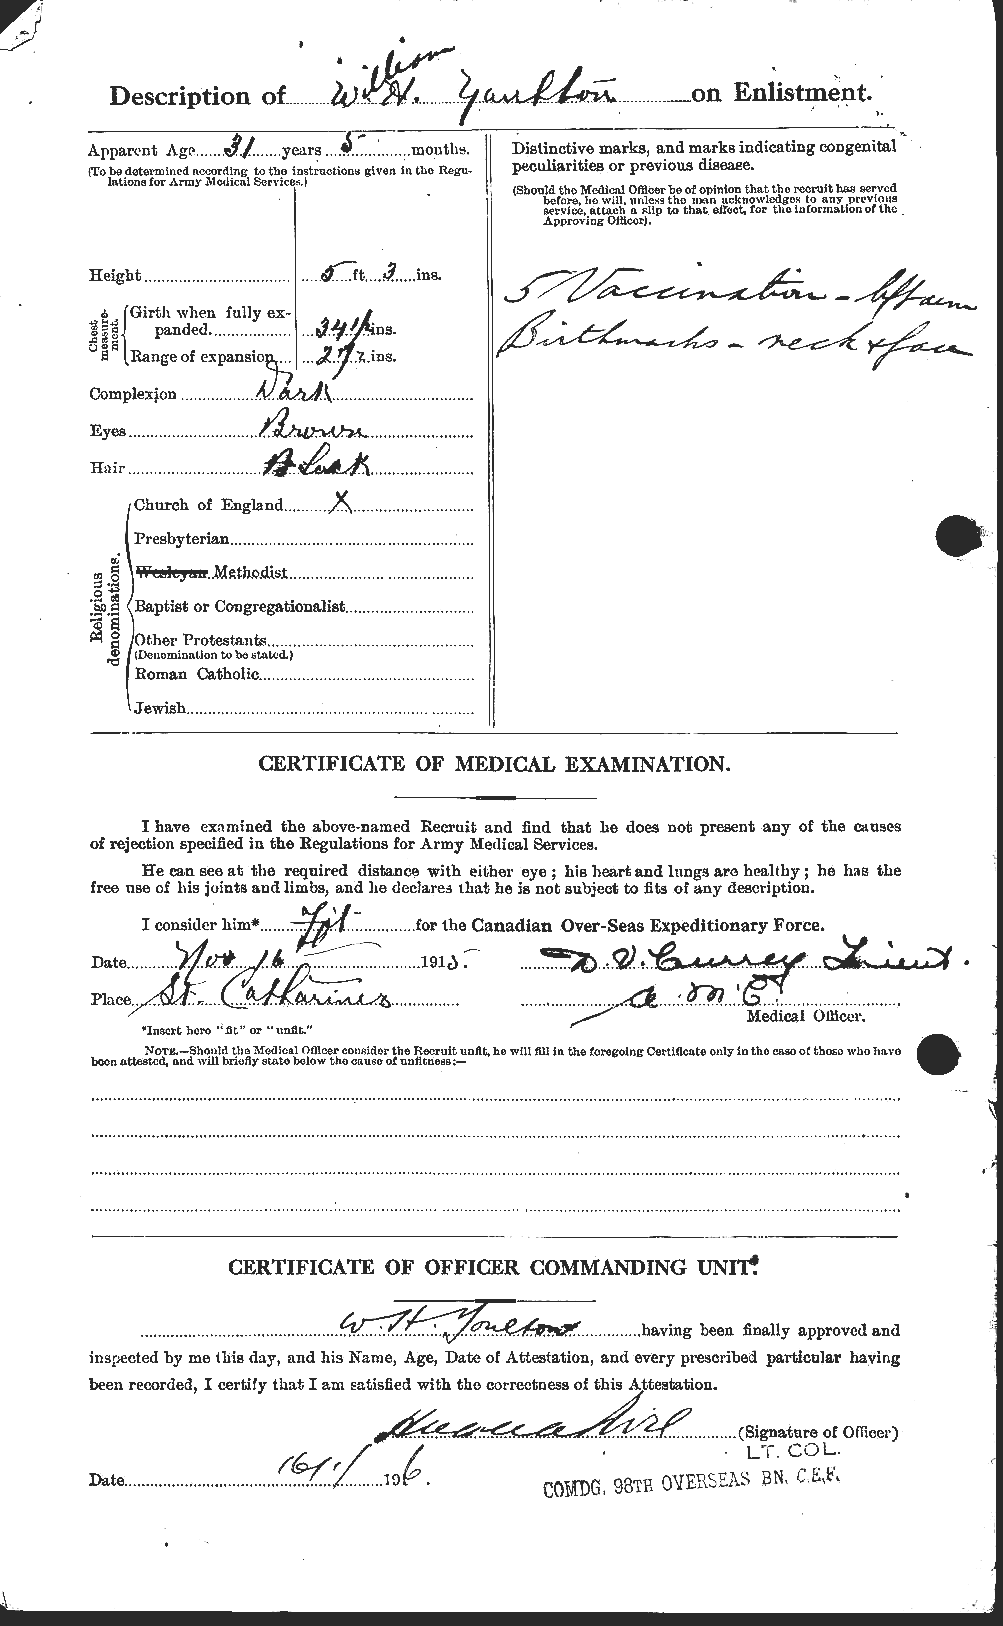 Attestation record: William Henry James Youlton